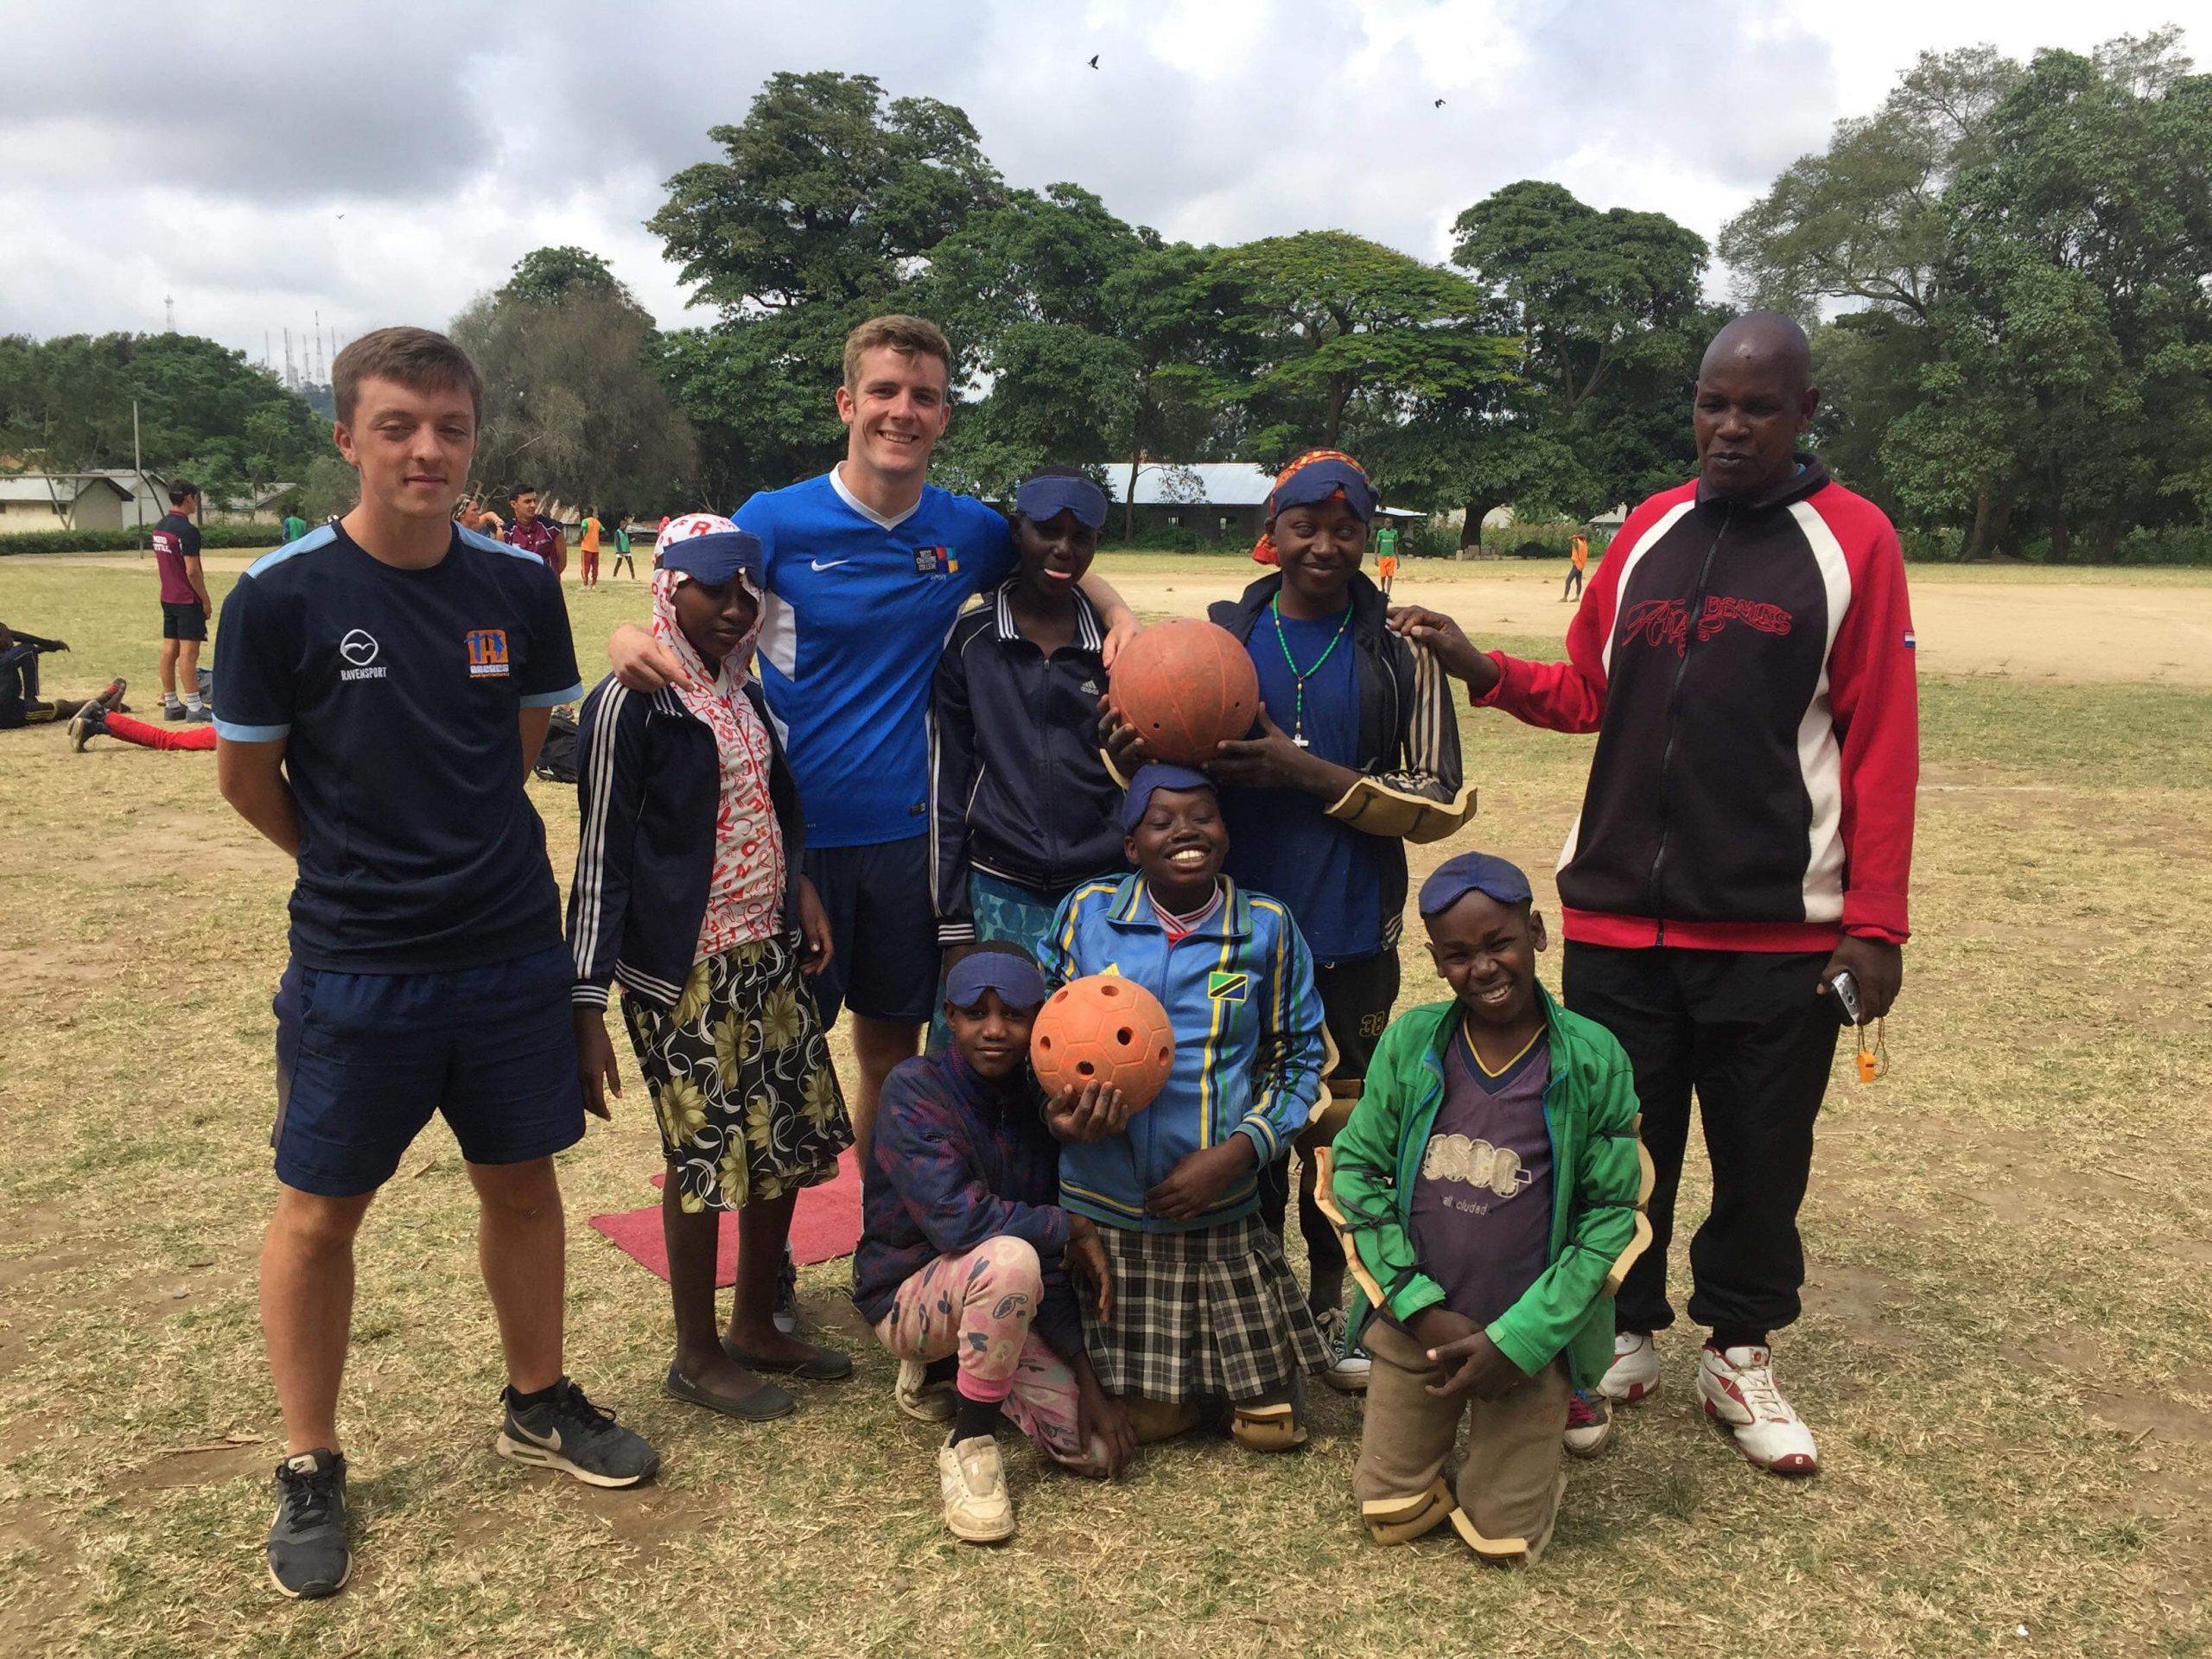 Alex Cockerham on the left of the photo stands with a group of children and other teachers during an outdoor goalball session in Tanzania